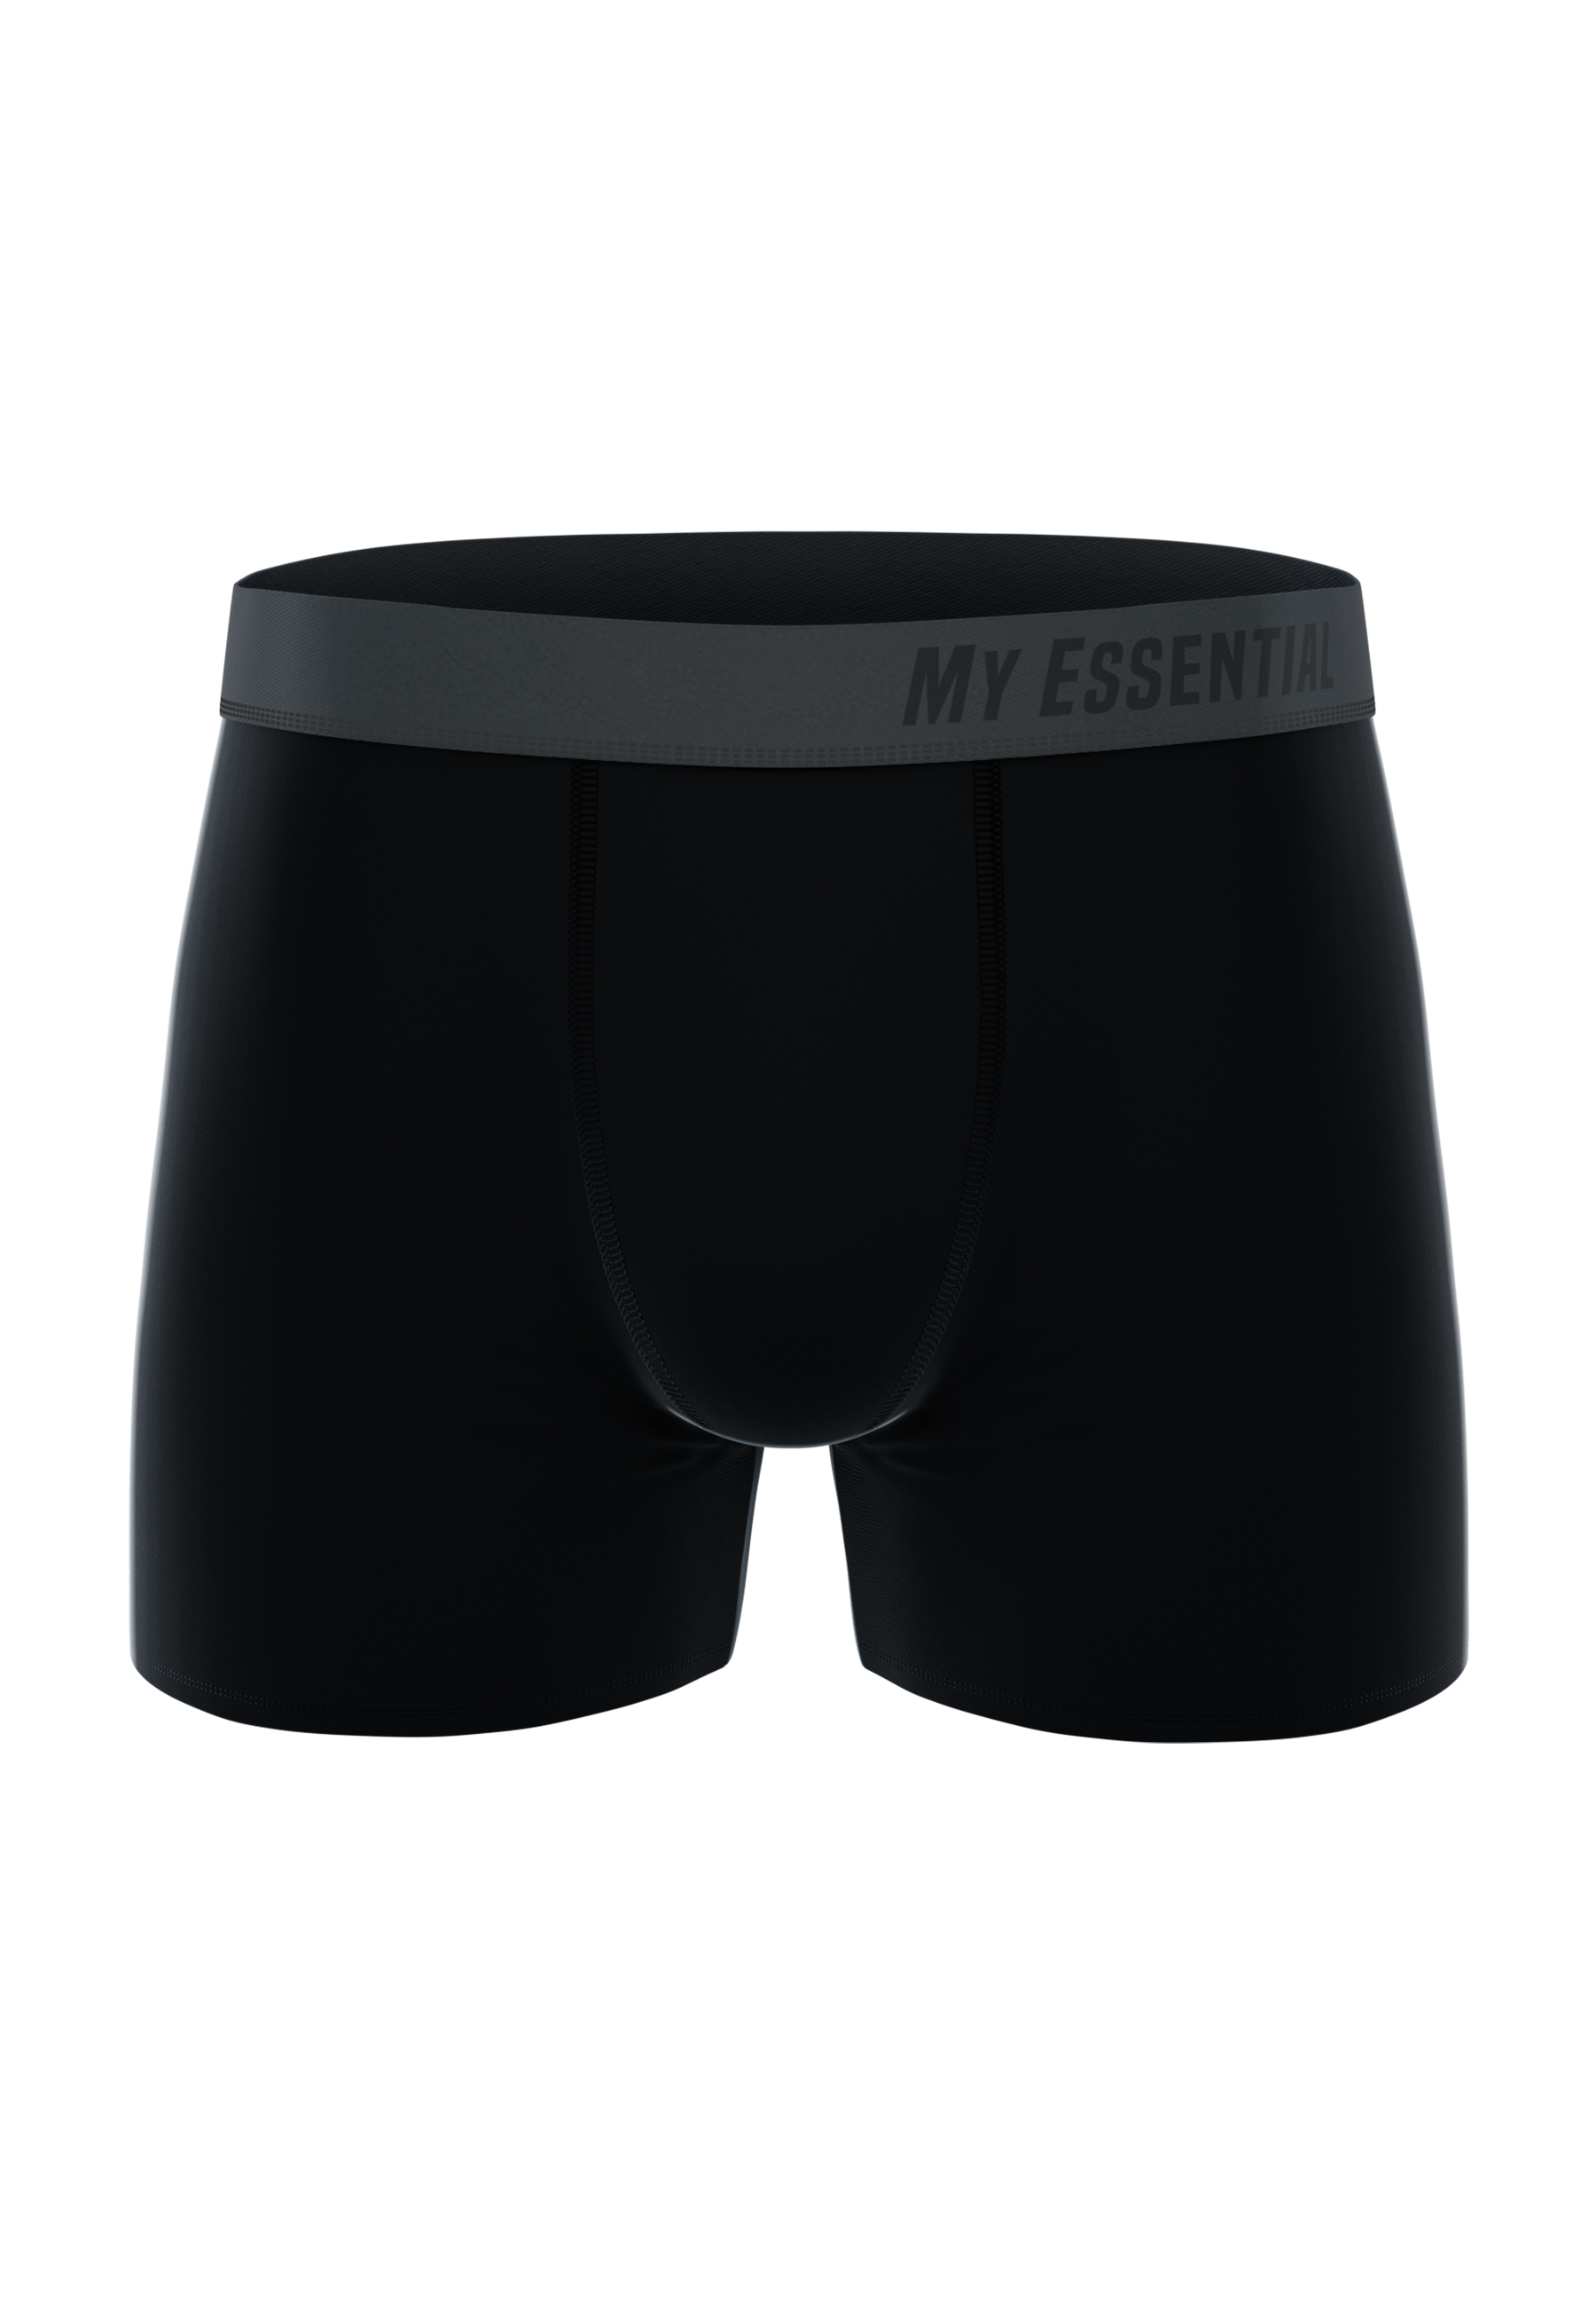 MY ESSENTIAL CLOTHING 3-Pack Boxershorts all black L